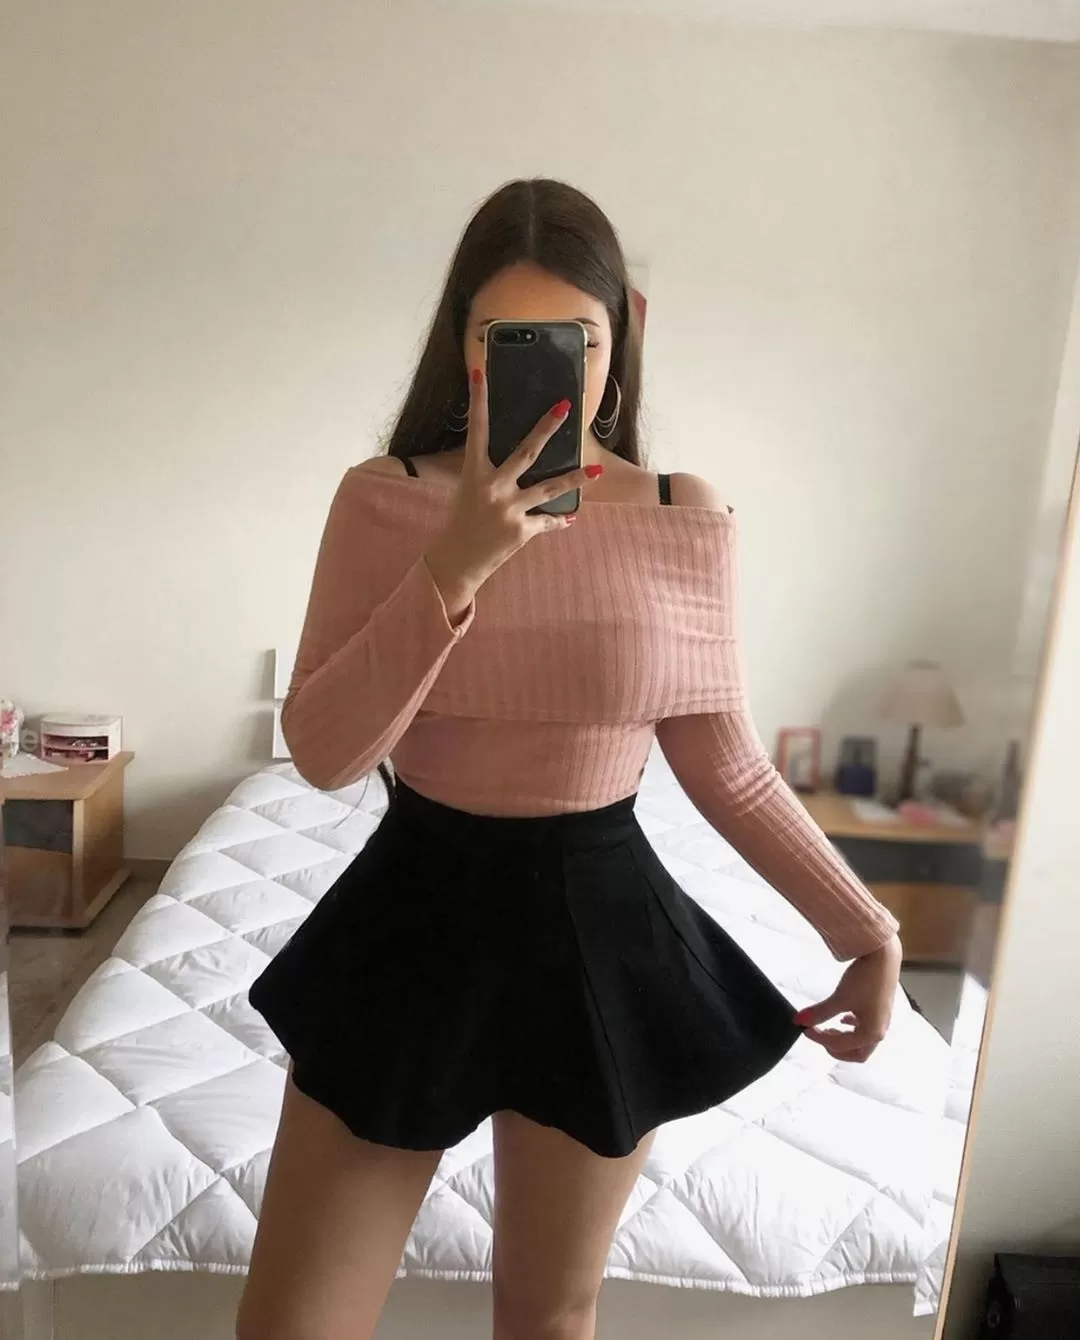 Hotlady Georgie private escort in Melton South